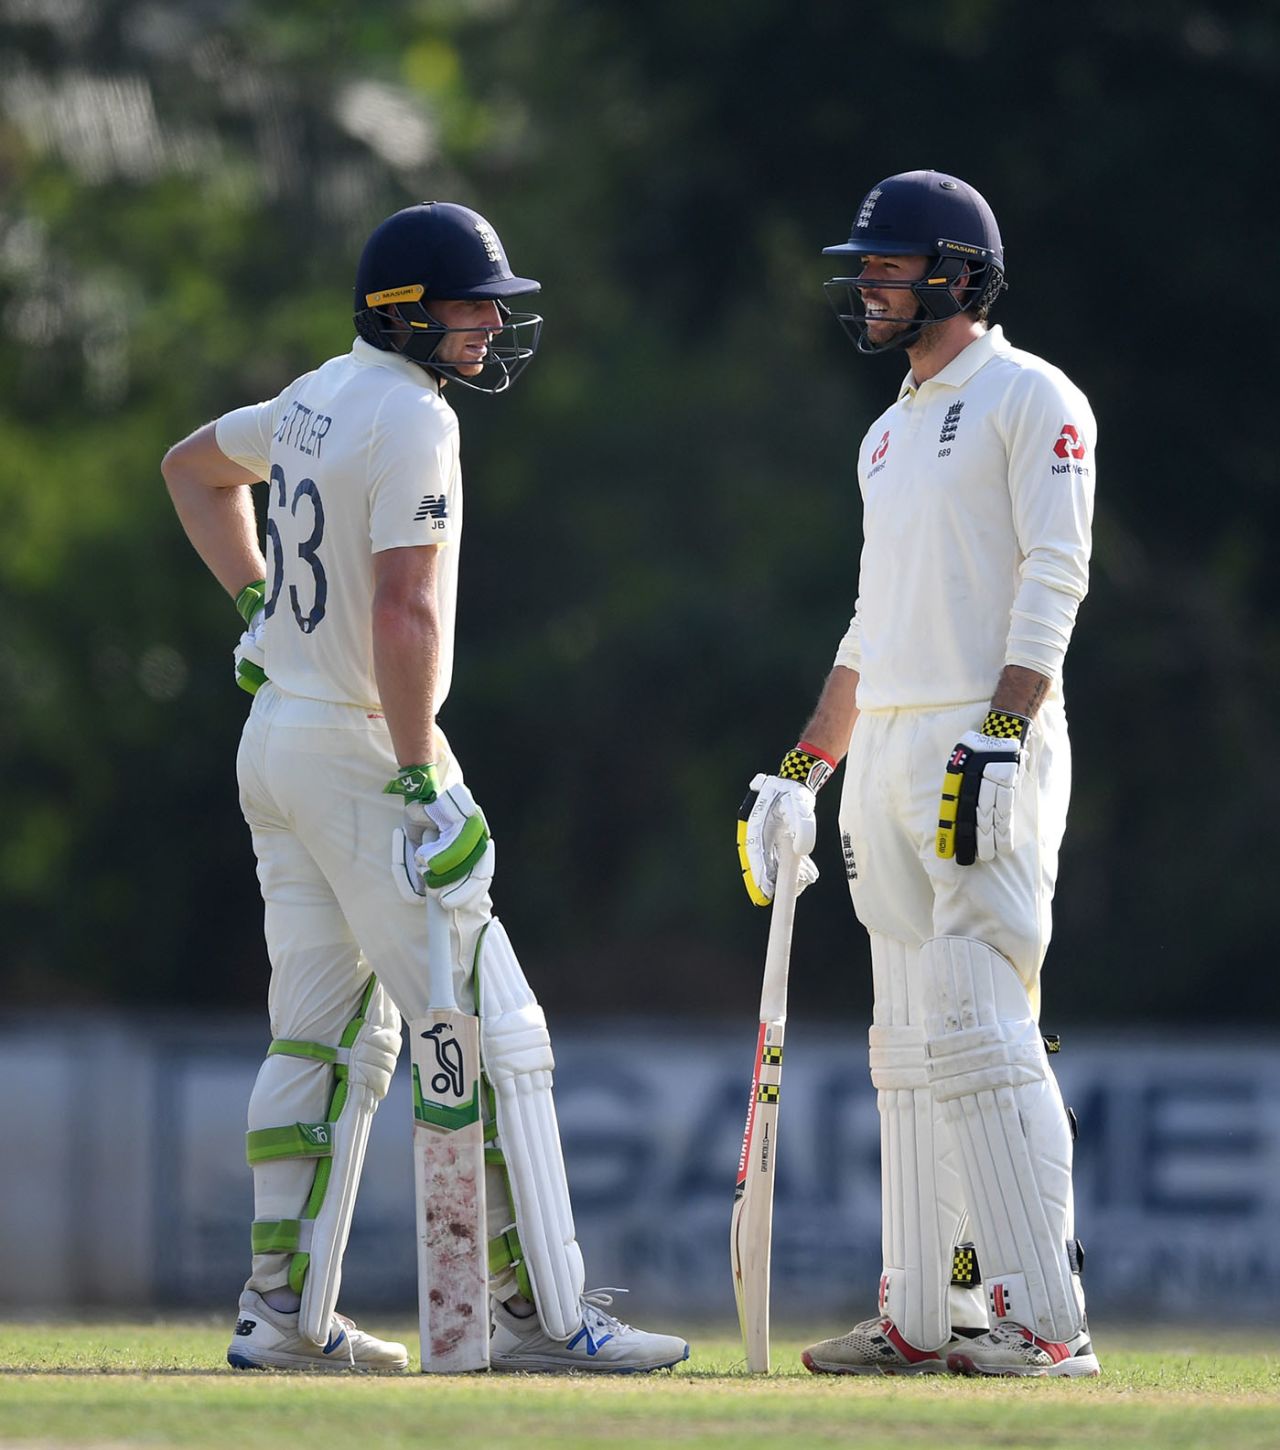 Jos Buttler and Ben Foakes spent time batting together in the middle, SLC XI v England XI, Tour match, Katunayake, March 7, 2020